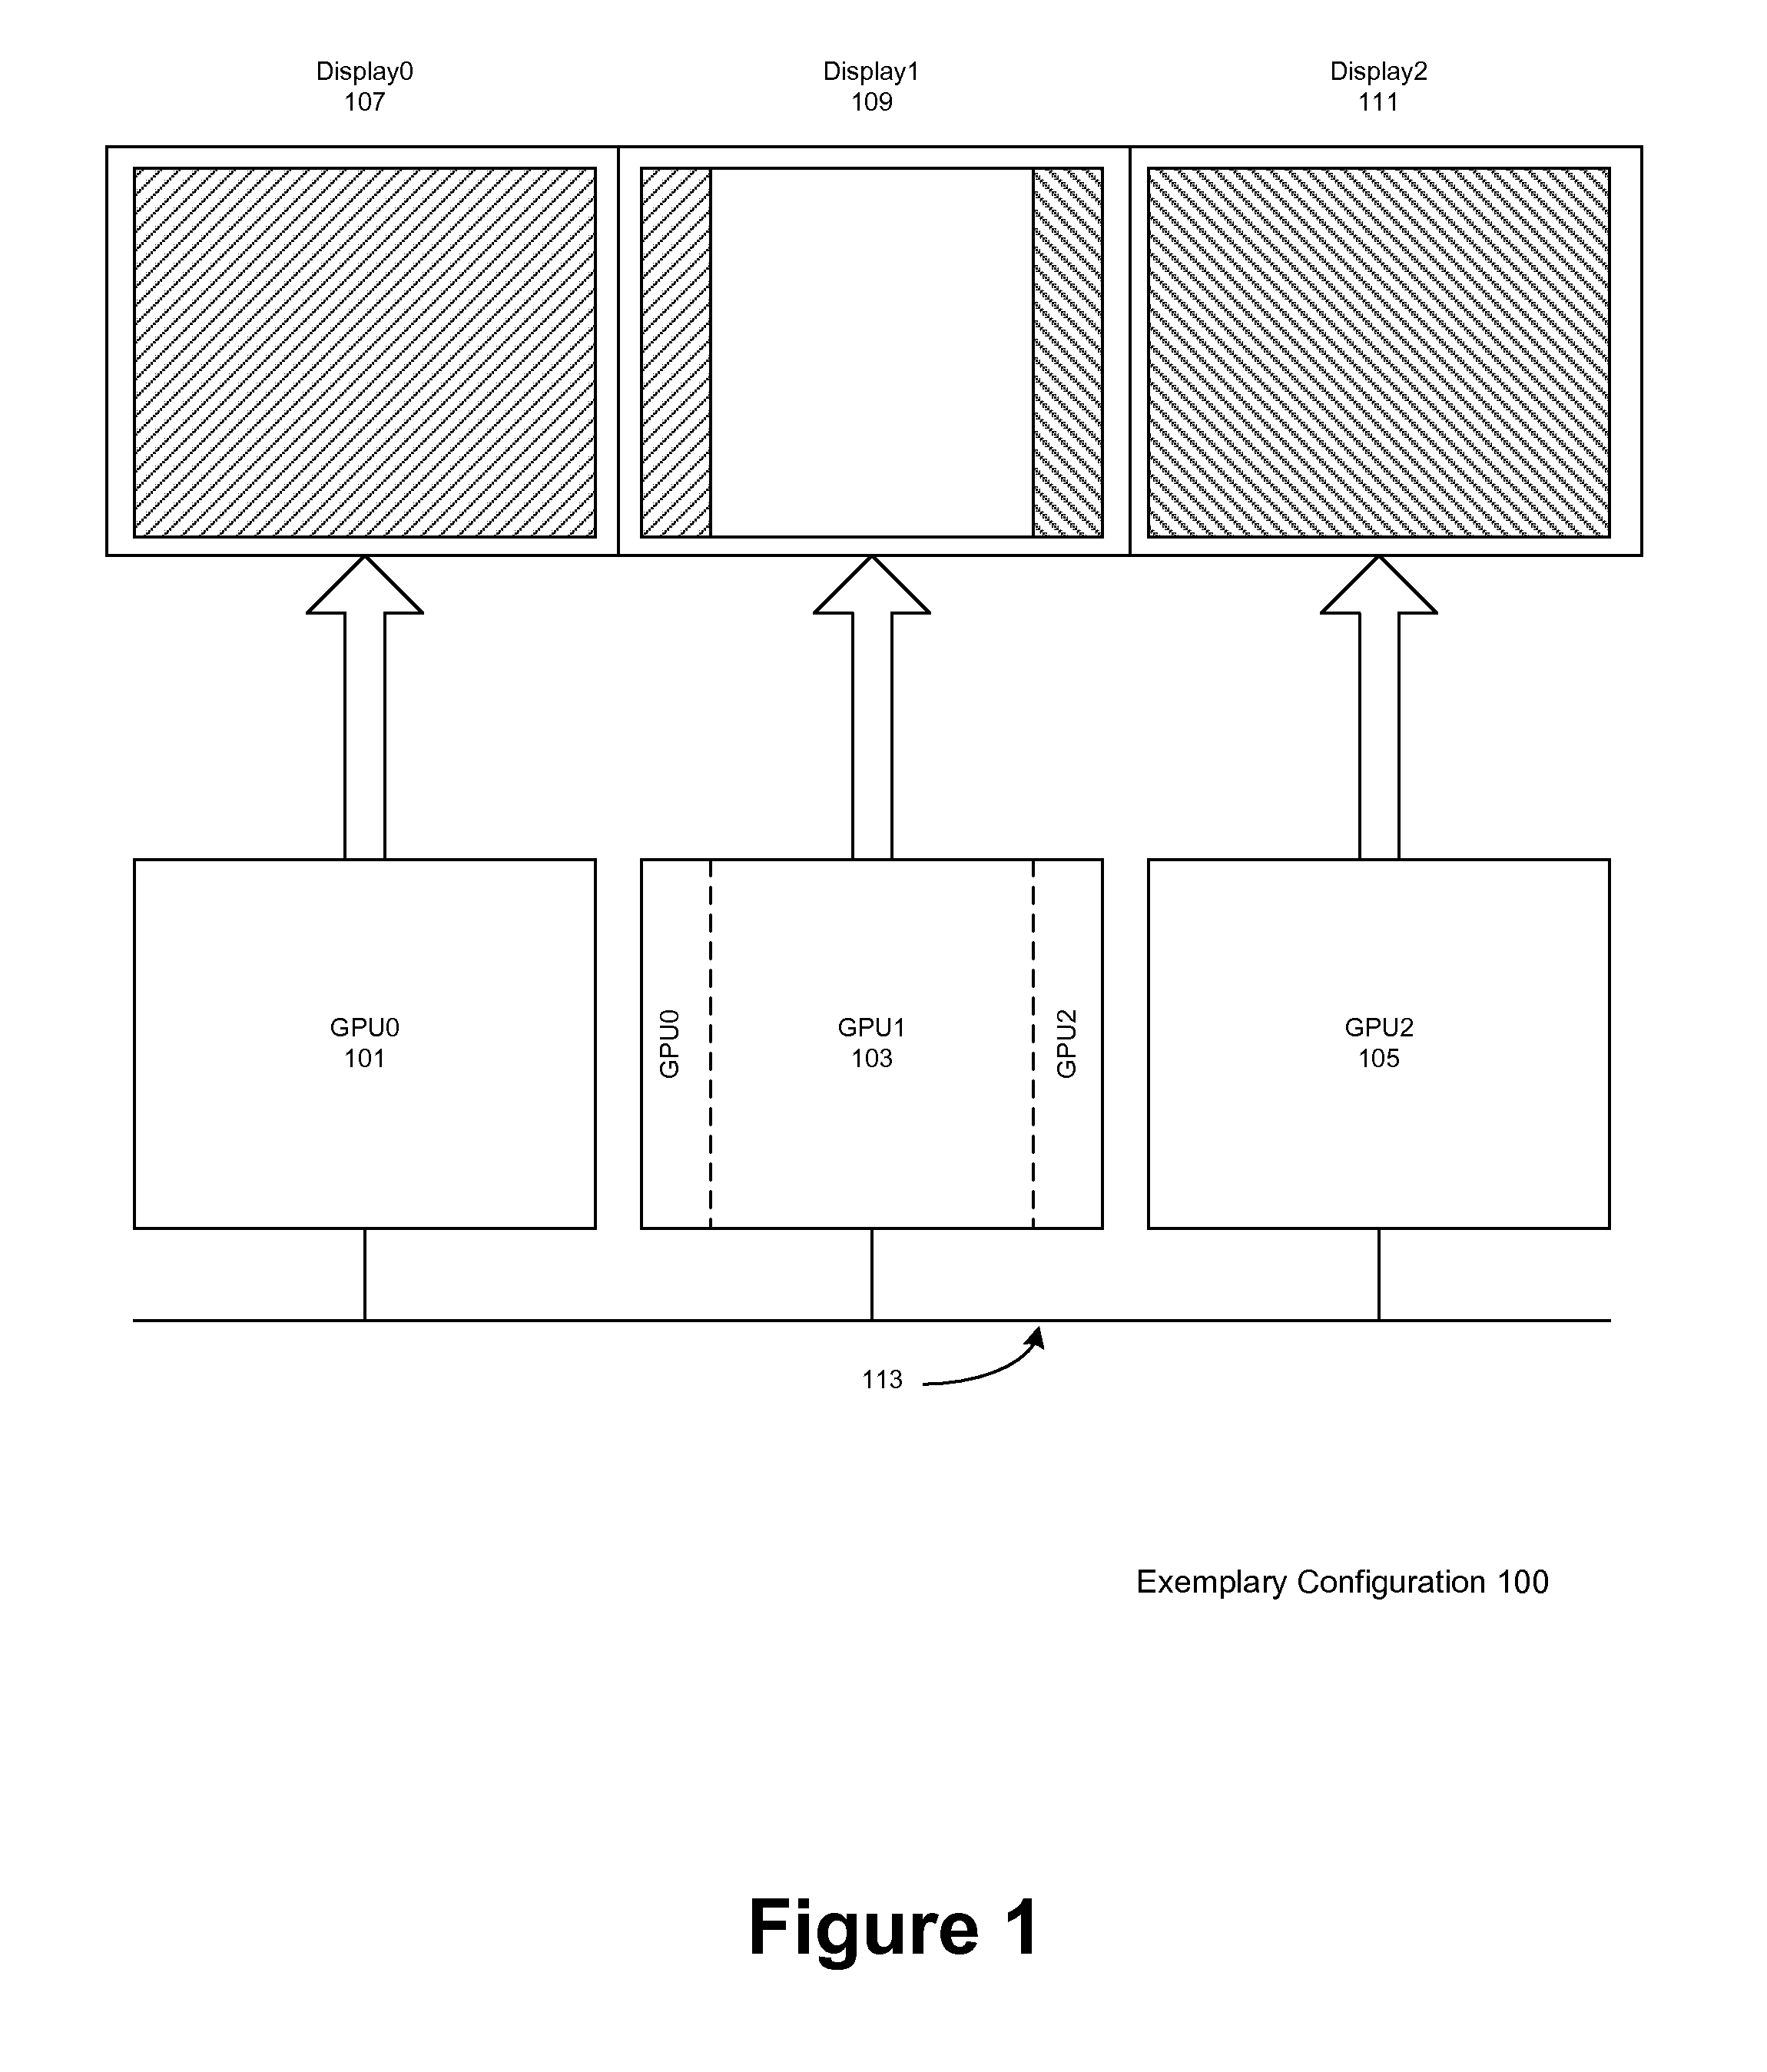 Load balancing in a system with multi-graphics processors and multi-display systems